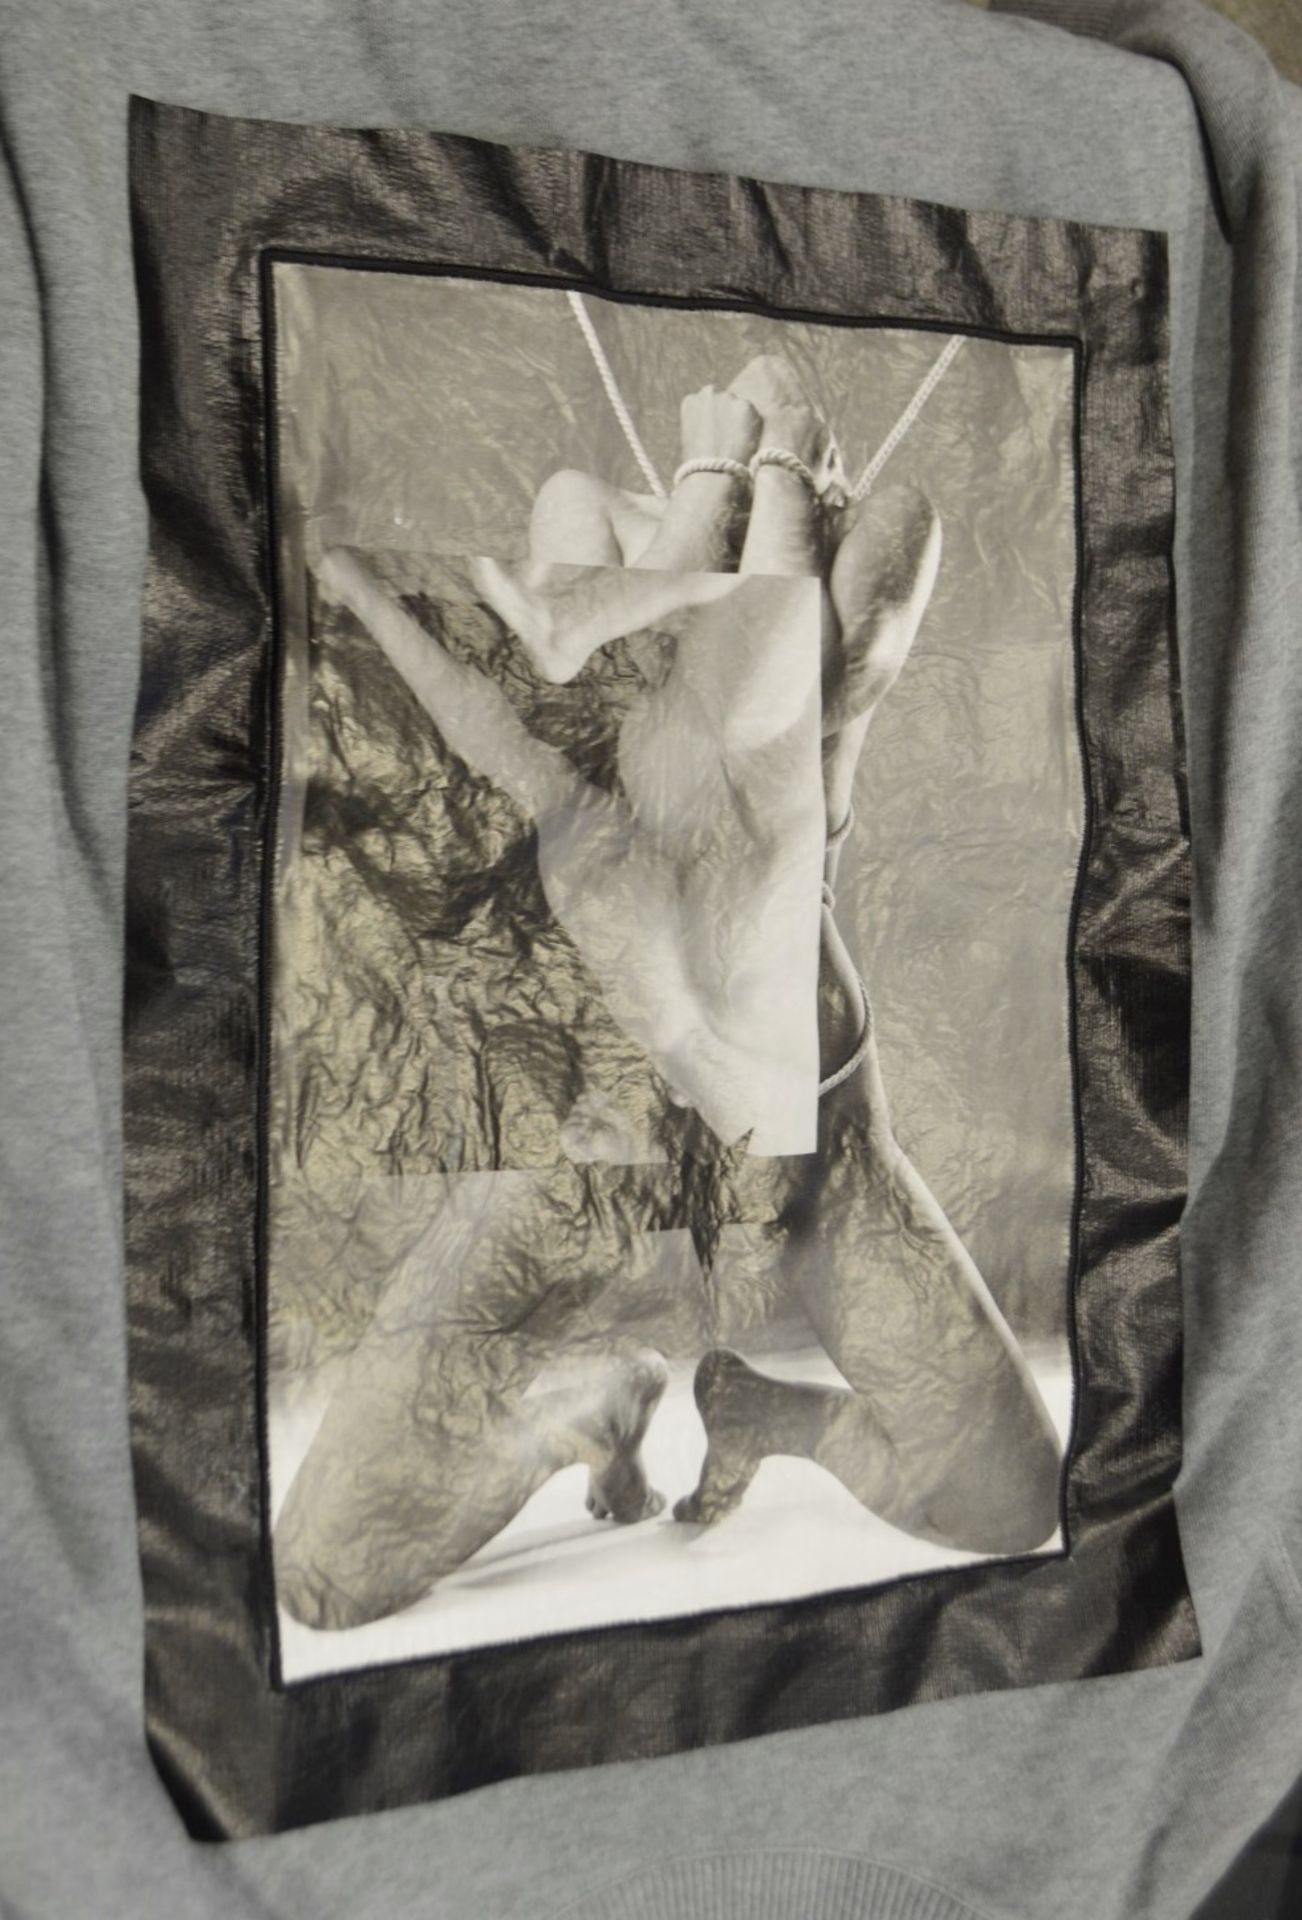 1 x Men's Genuine Givenchy Sweatshirt In Grey With Lambskin Panel On Front With Embroidered Border - Image 7 of 9